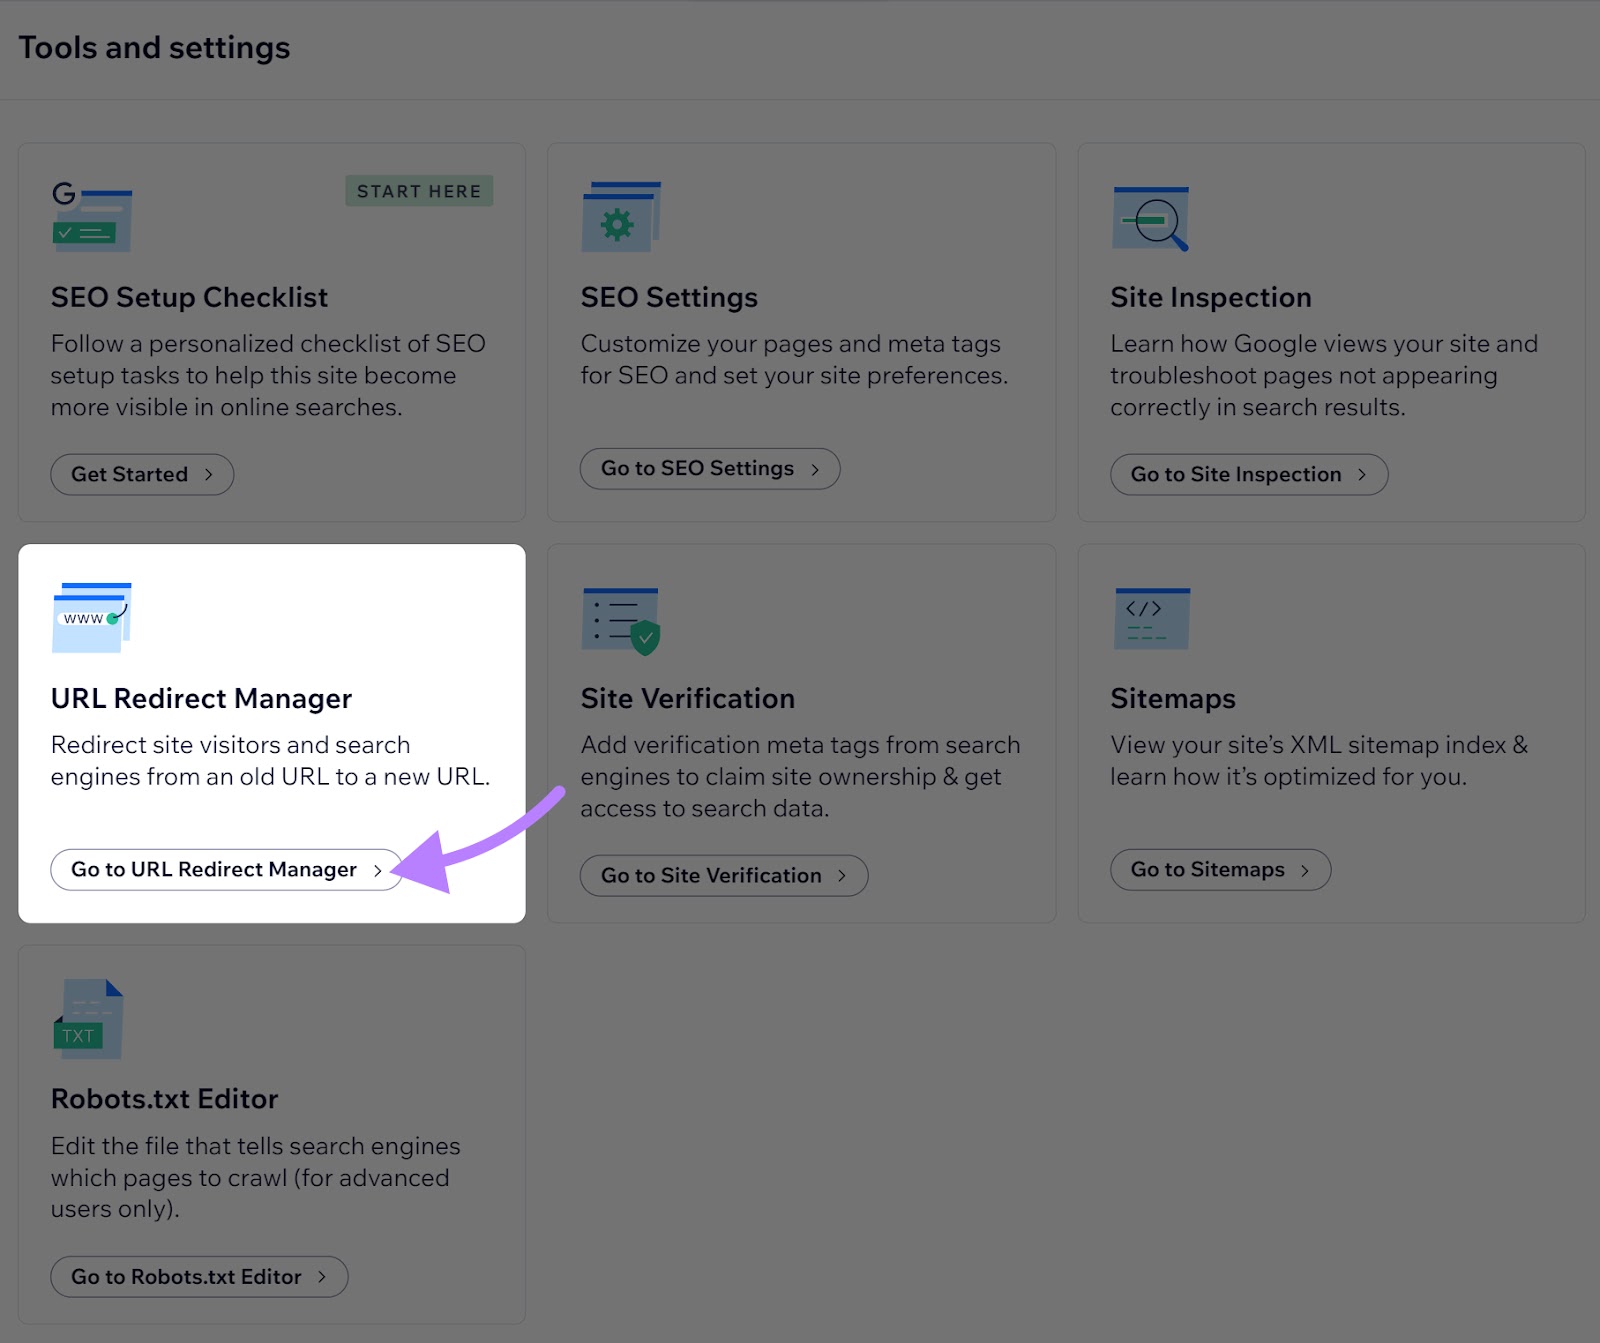 “URL Redirect Manager” widget selected under the “Tools and settings” section